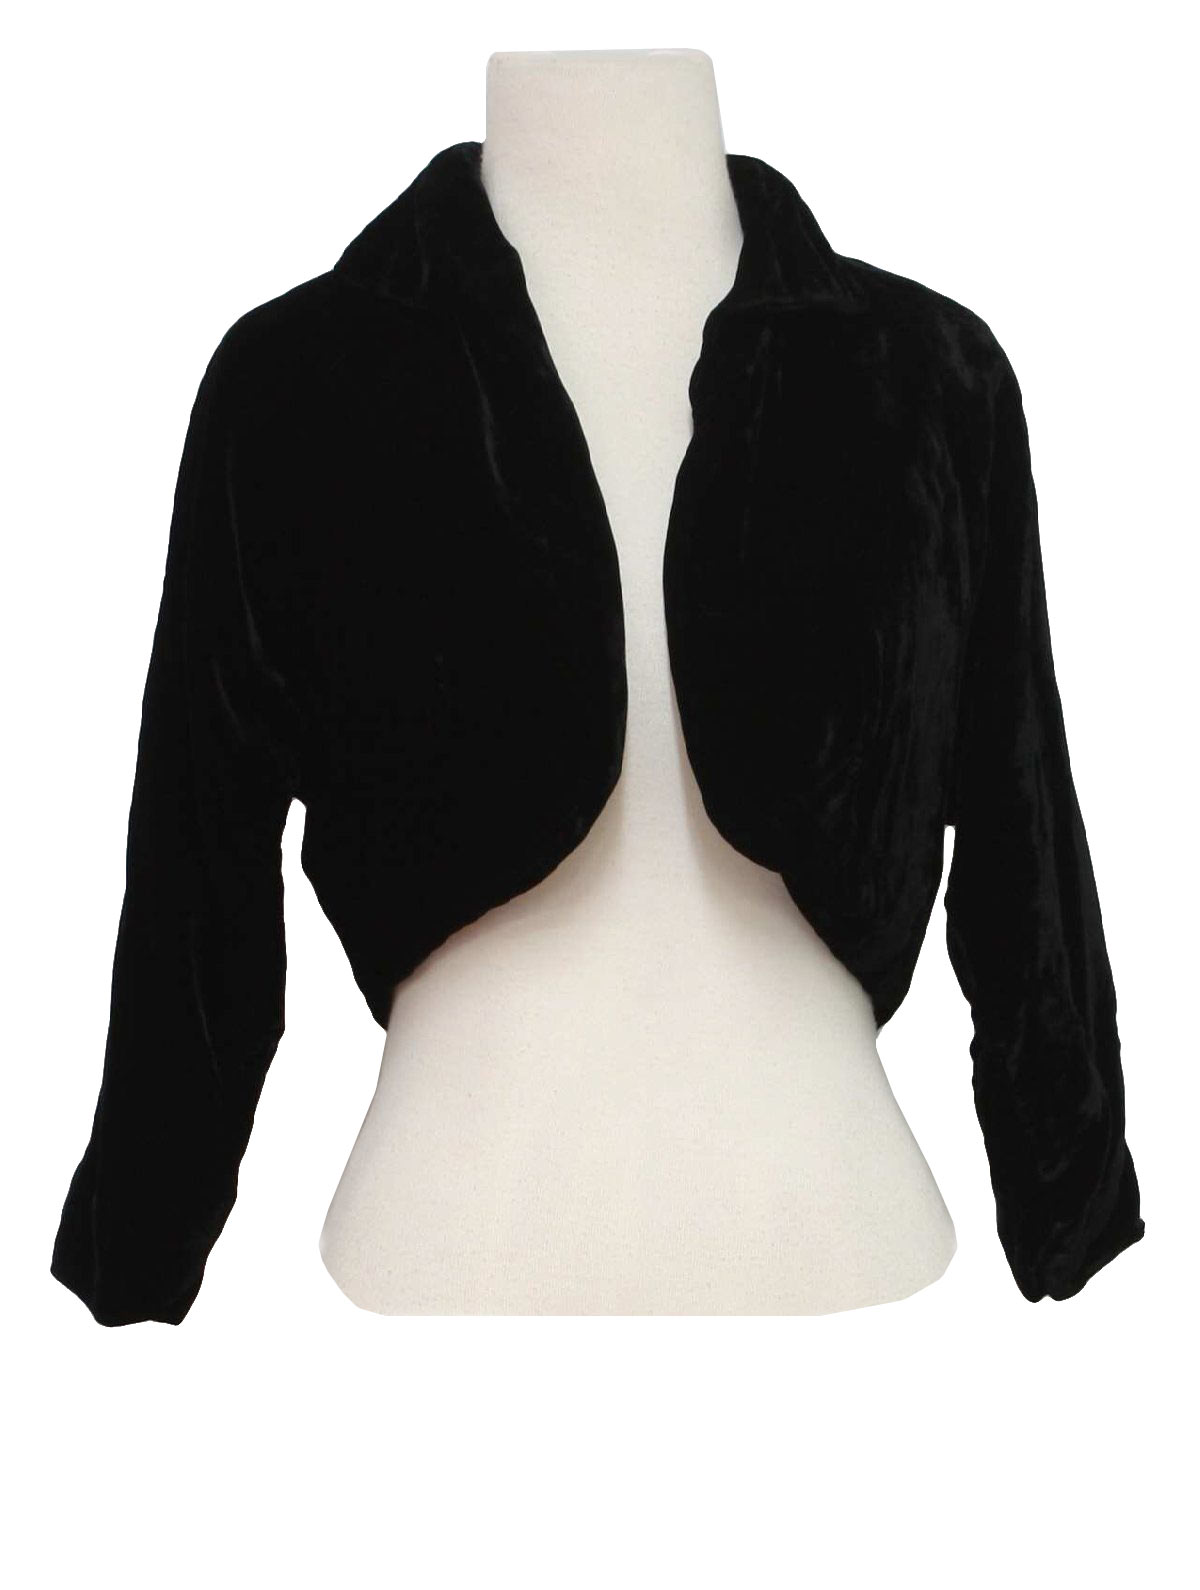 cocktail jackets for ladies